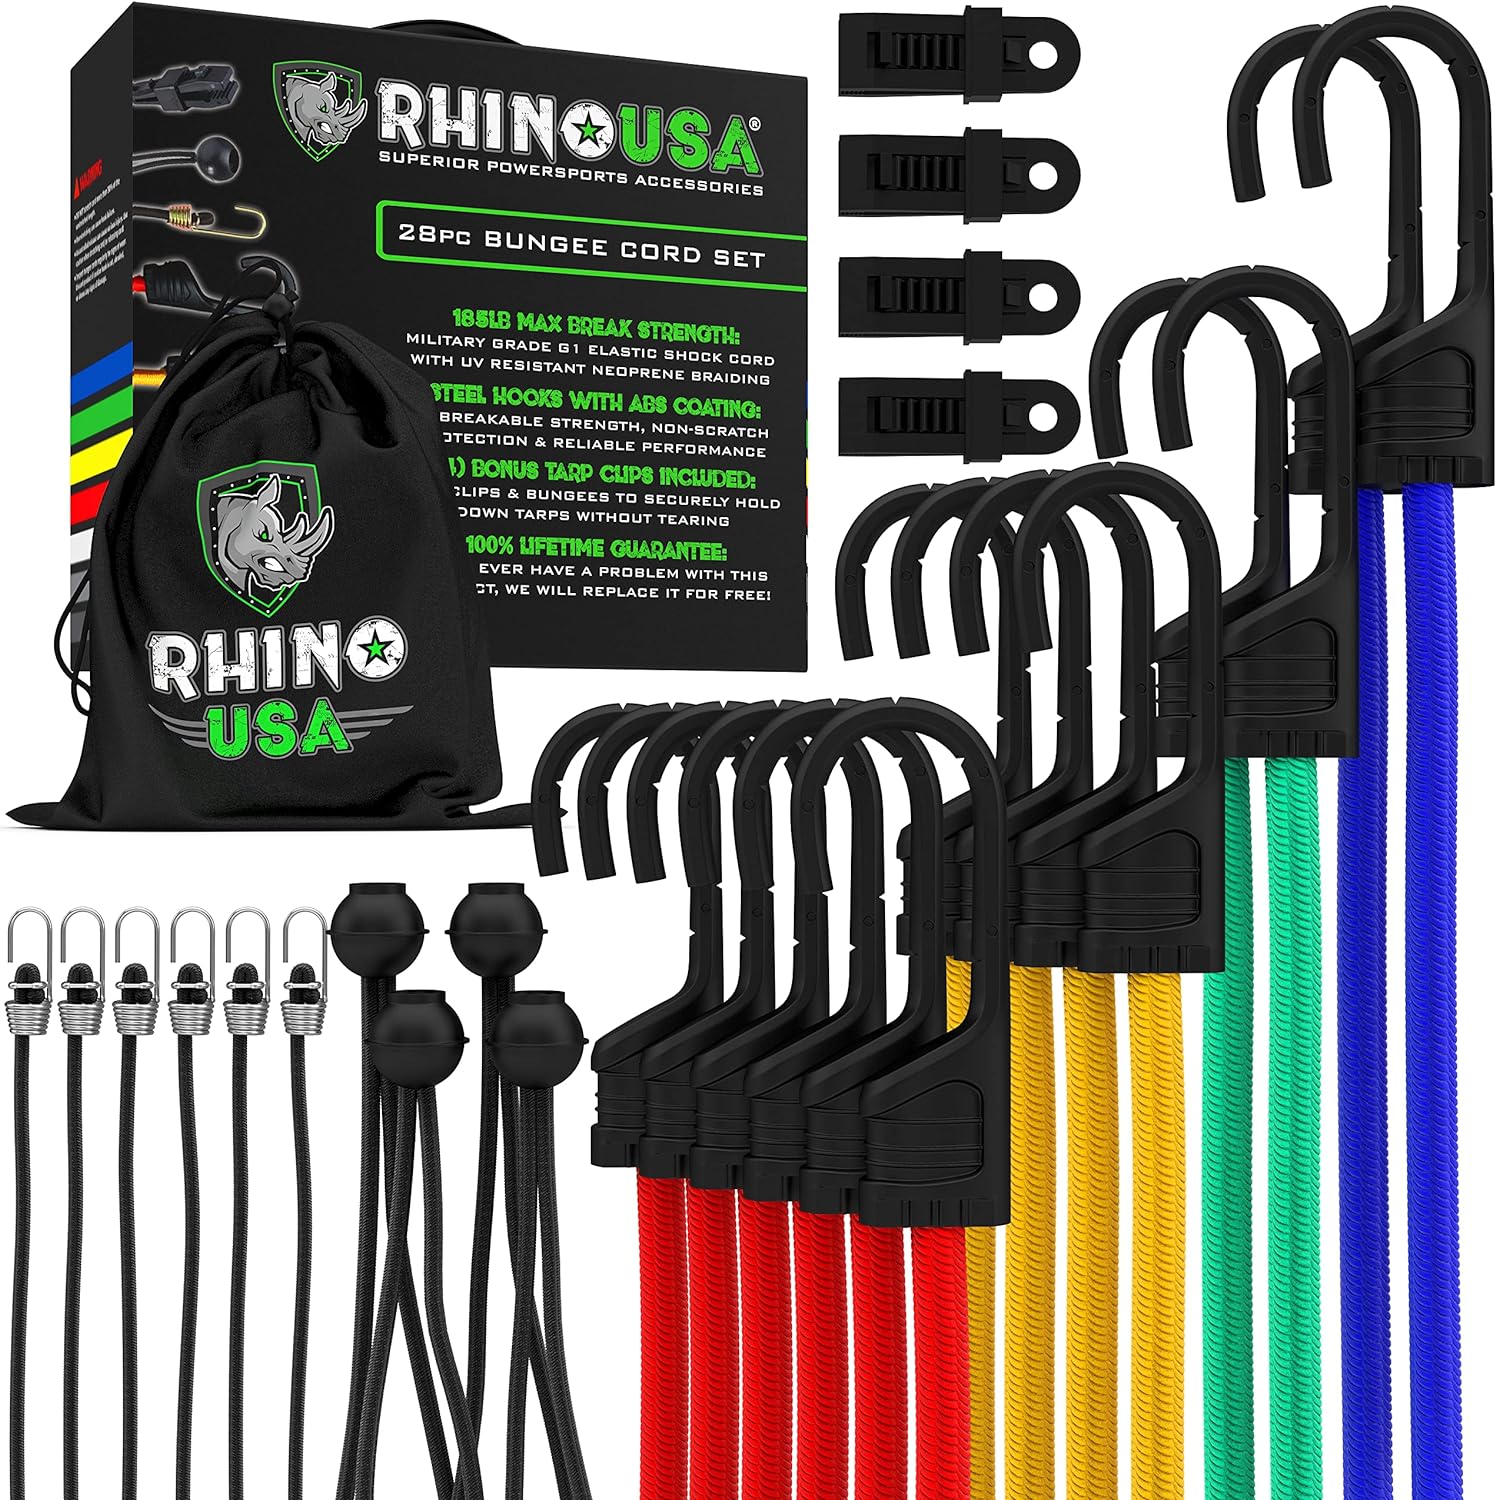 Generic Rhino USA Bungee Cords Outdoor with Hooks - Heavy Duty 28pc Assortment with 4 Free Tarp Clips, Drawstring Organizer Bag, Canopy